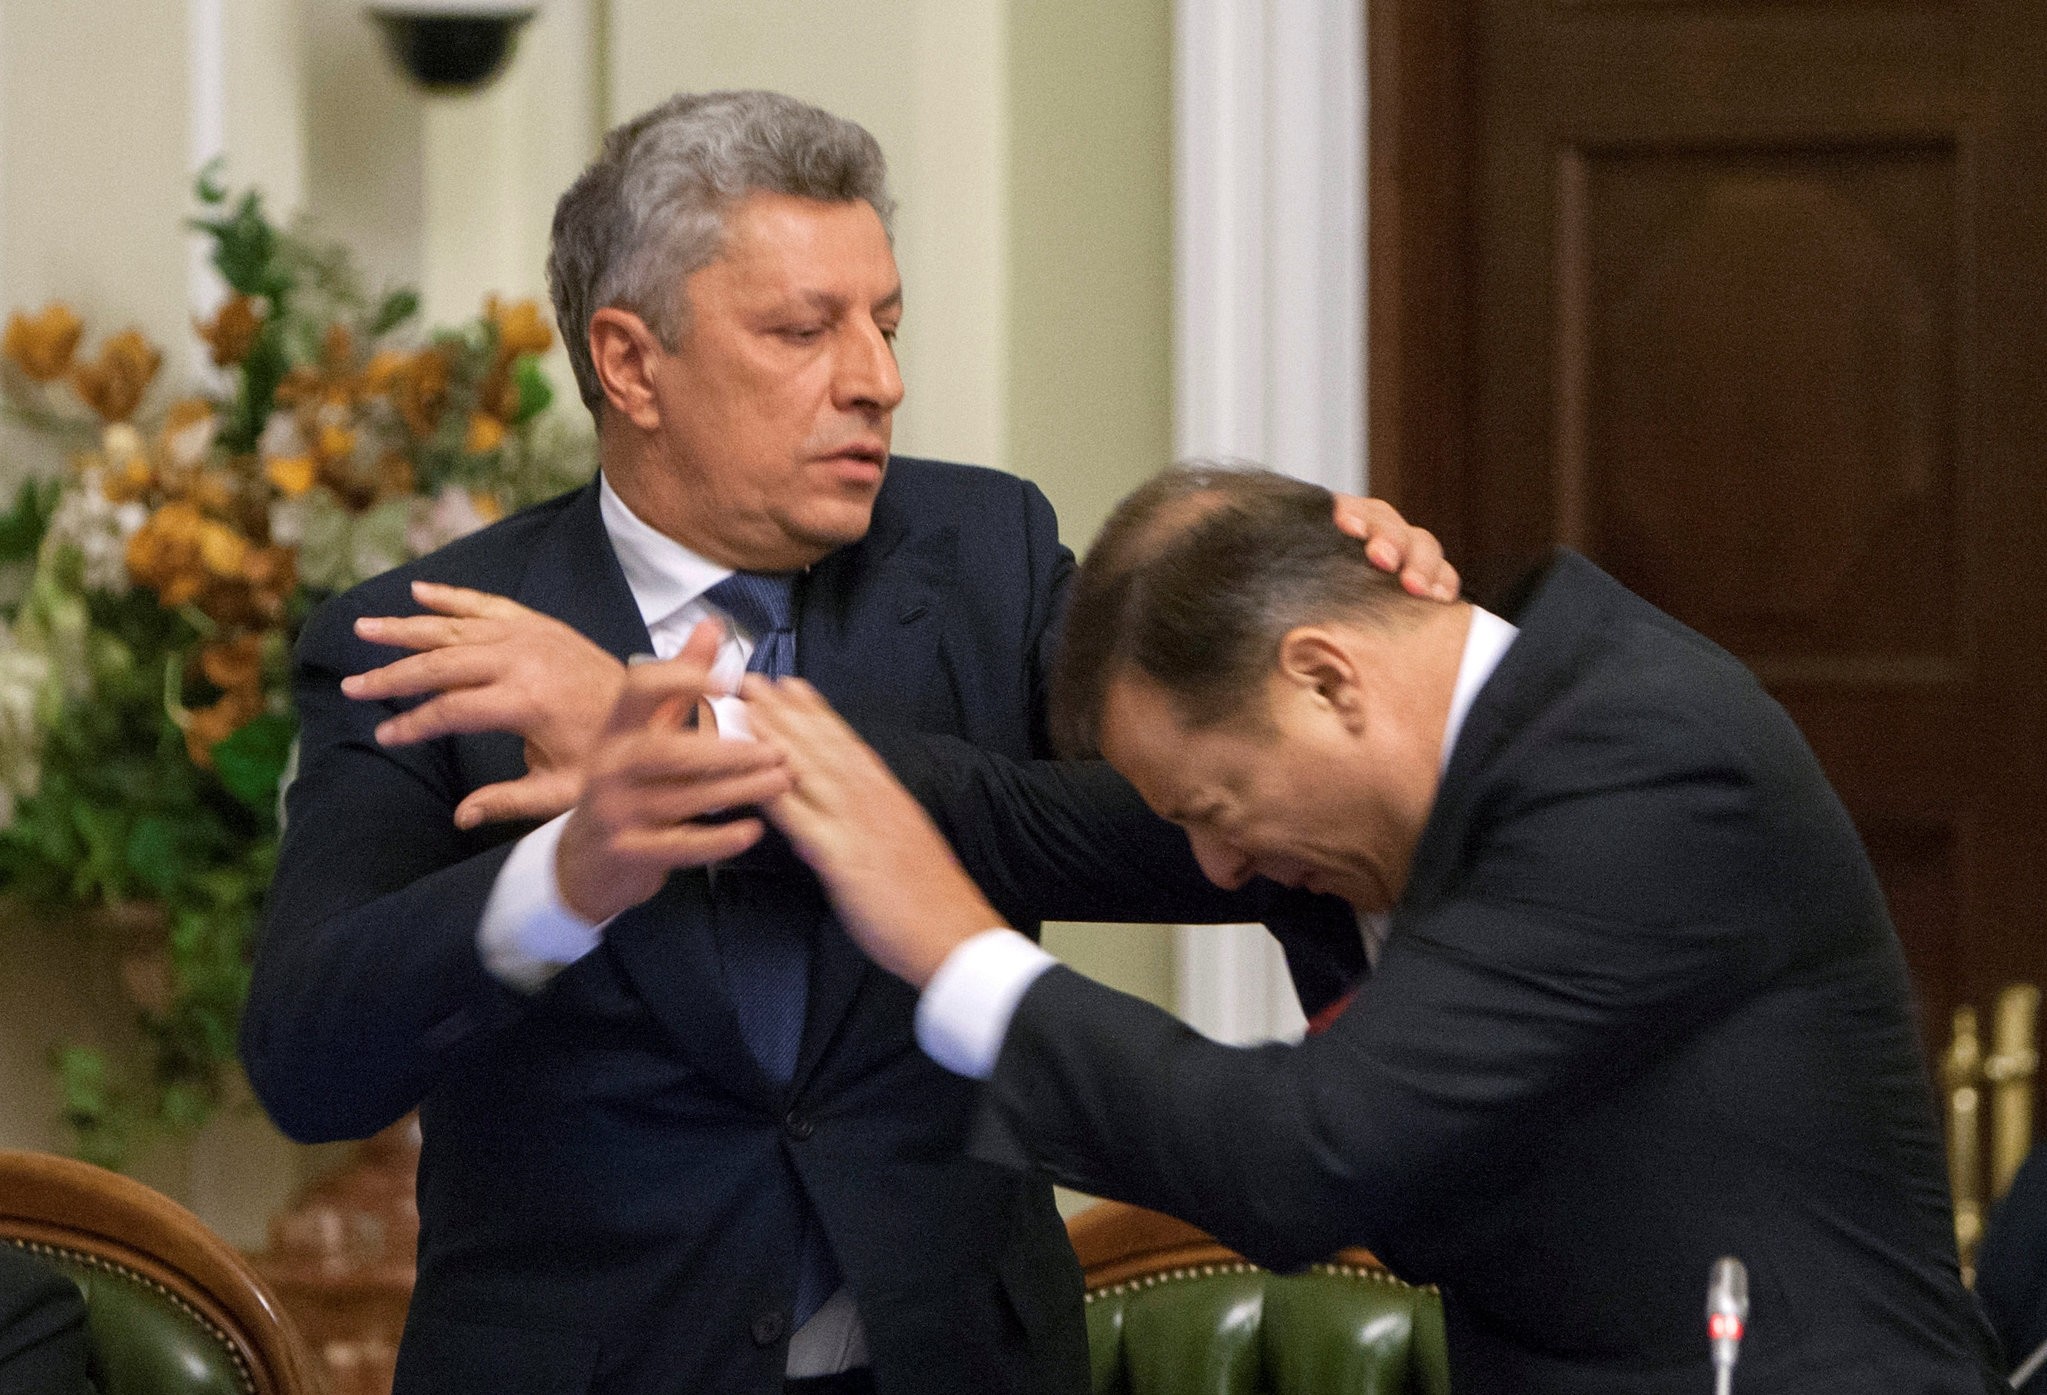 Opposition Party leader Yuriy Boyko (L) and leader of Radical Party Oleh Lyashko scuffle during a meeting of parliament faction leaders in Kiev, Ukraine, November 14, 2016. (REUTERS Photo)